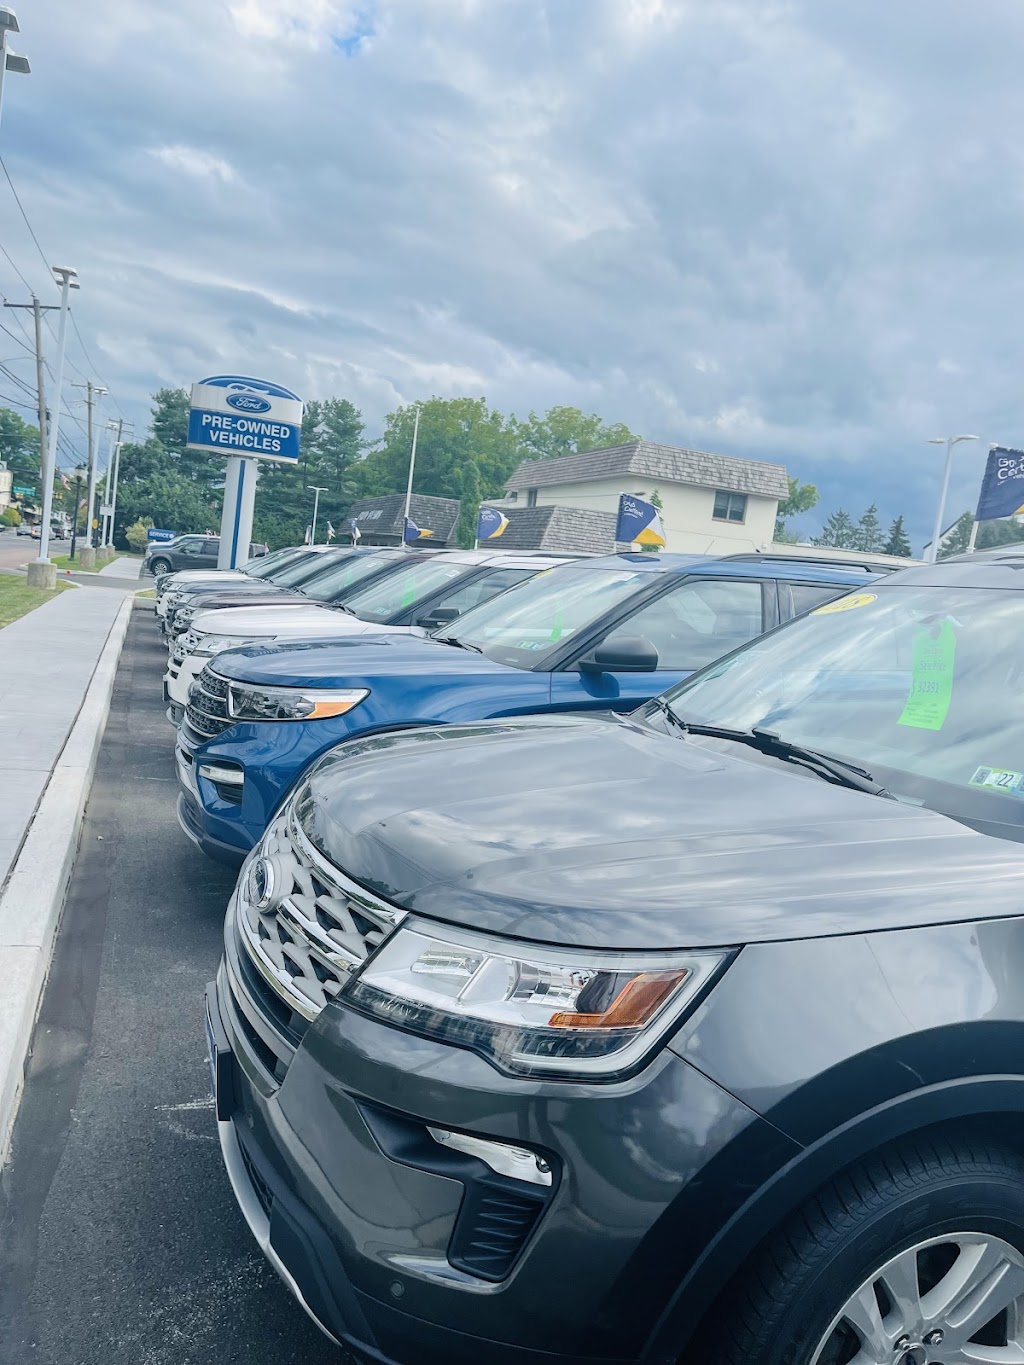 Fred Beans Ford of Newtown | 10 N Sycamore St, Newtown, PA 18940 | Phone: (215) 968-3806